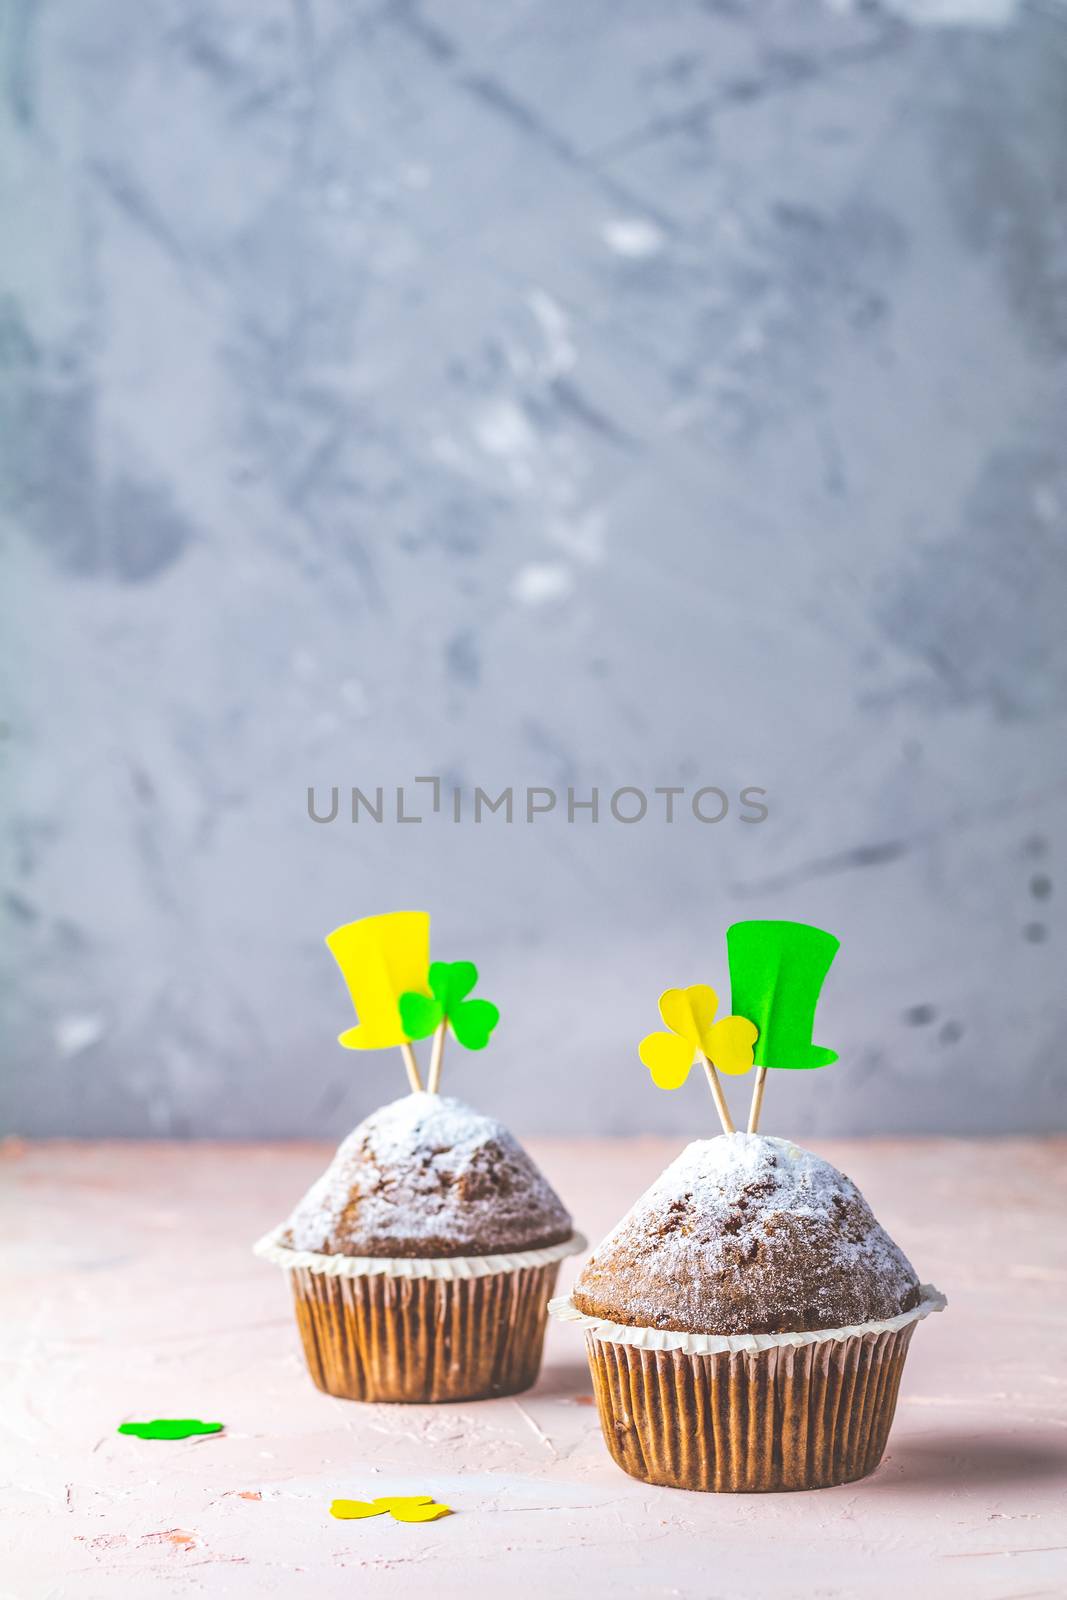 Sweet homemade muffin for Saint Patrick day. by ArtSvitlyna